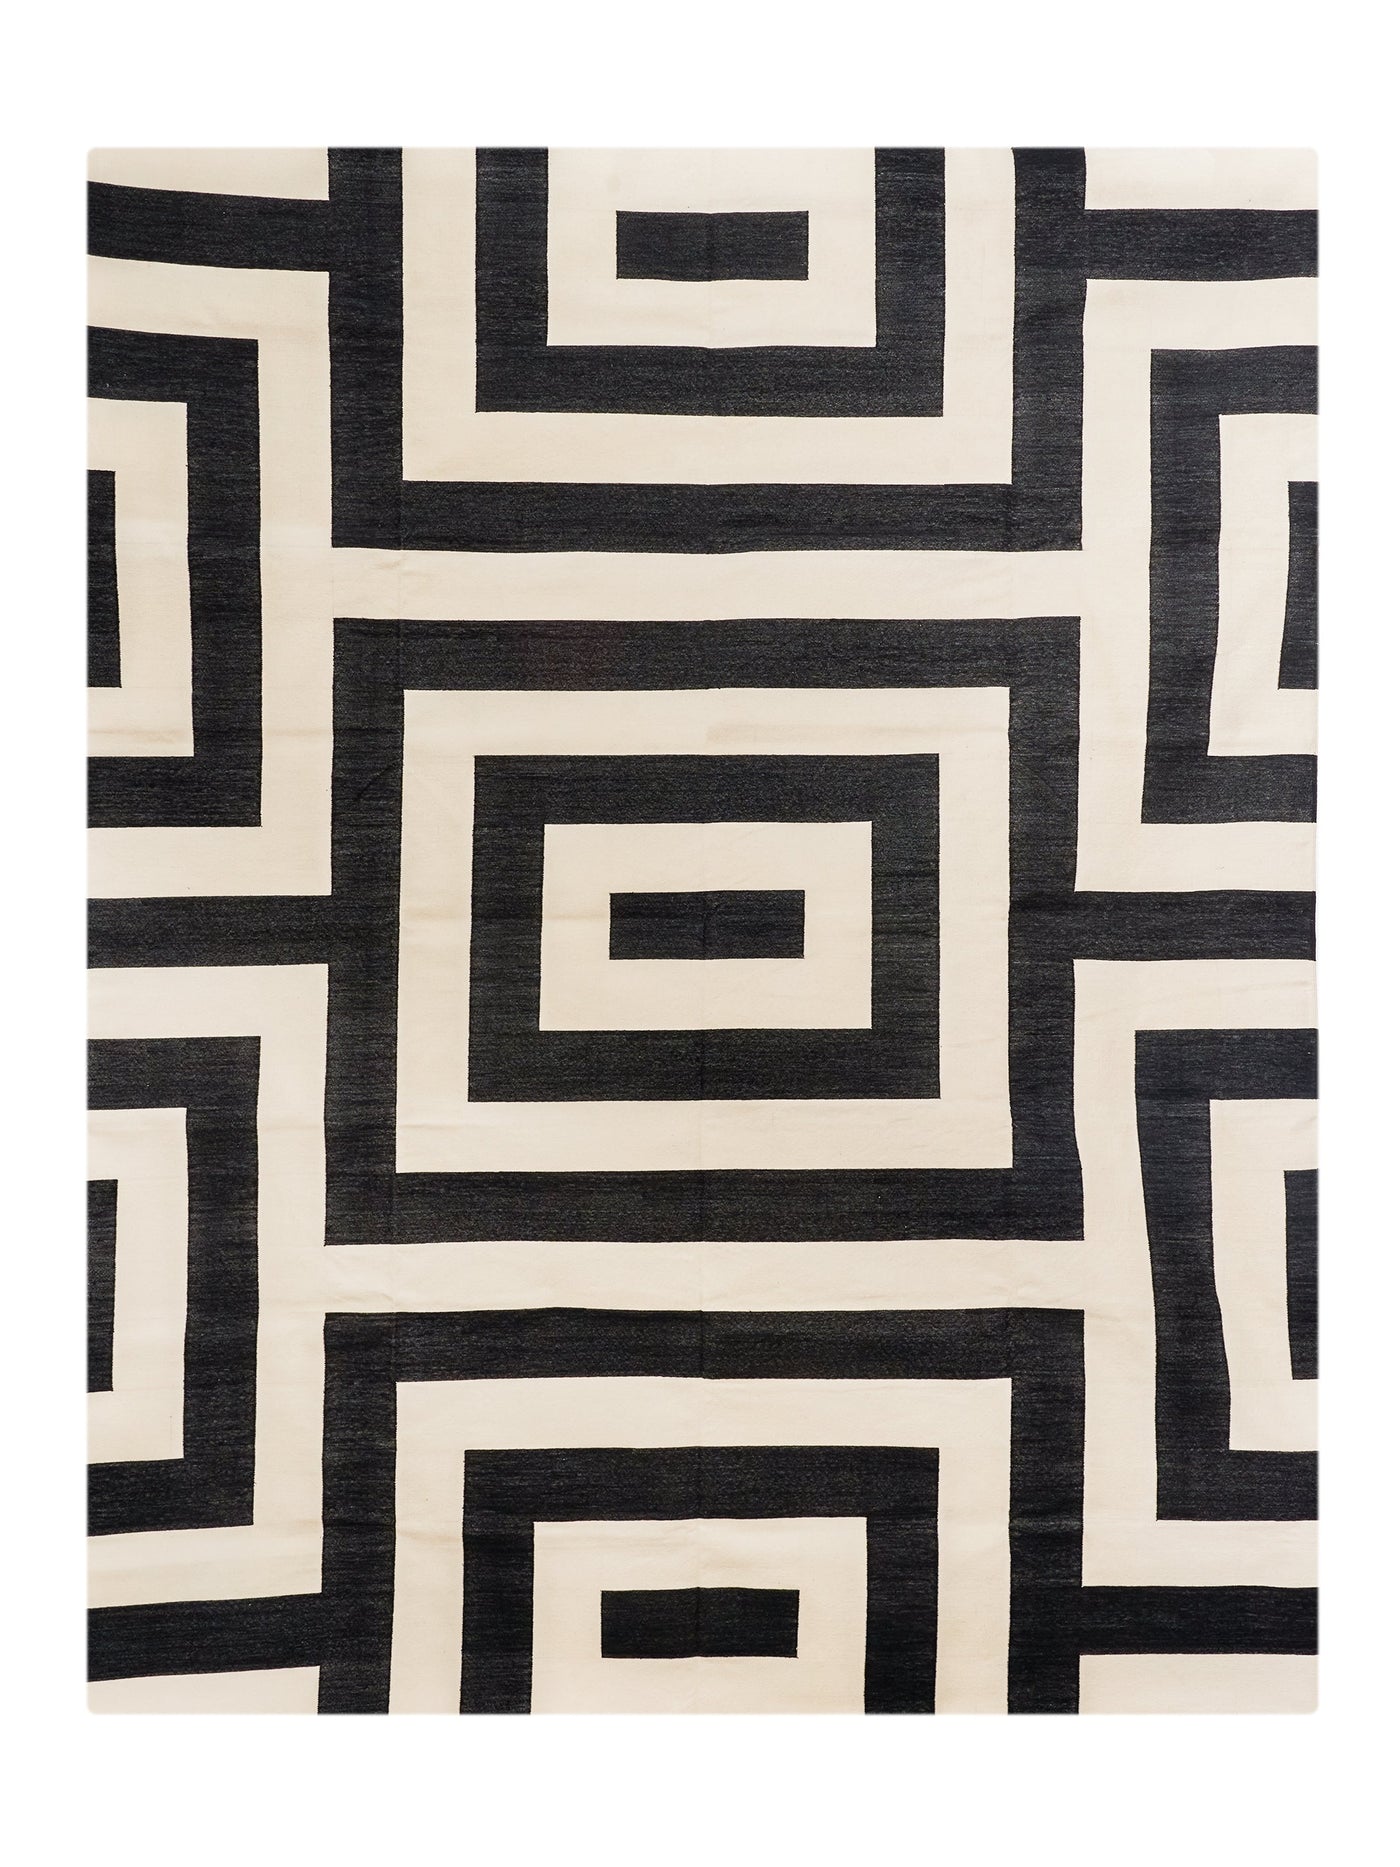 Cotton Dhurrie Bowie Rug 10x14 Feet in Black & White by Permanent Resident